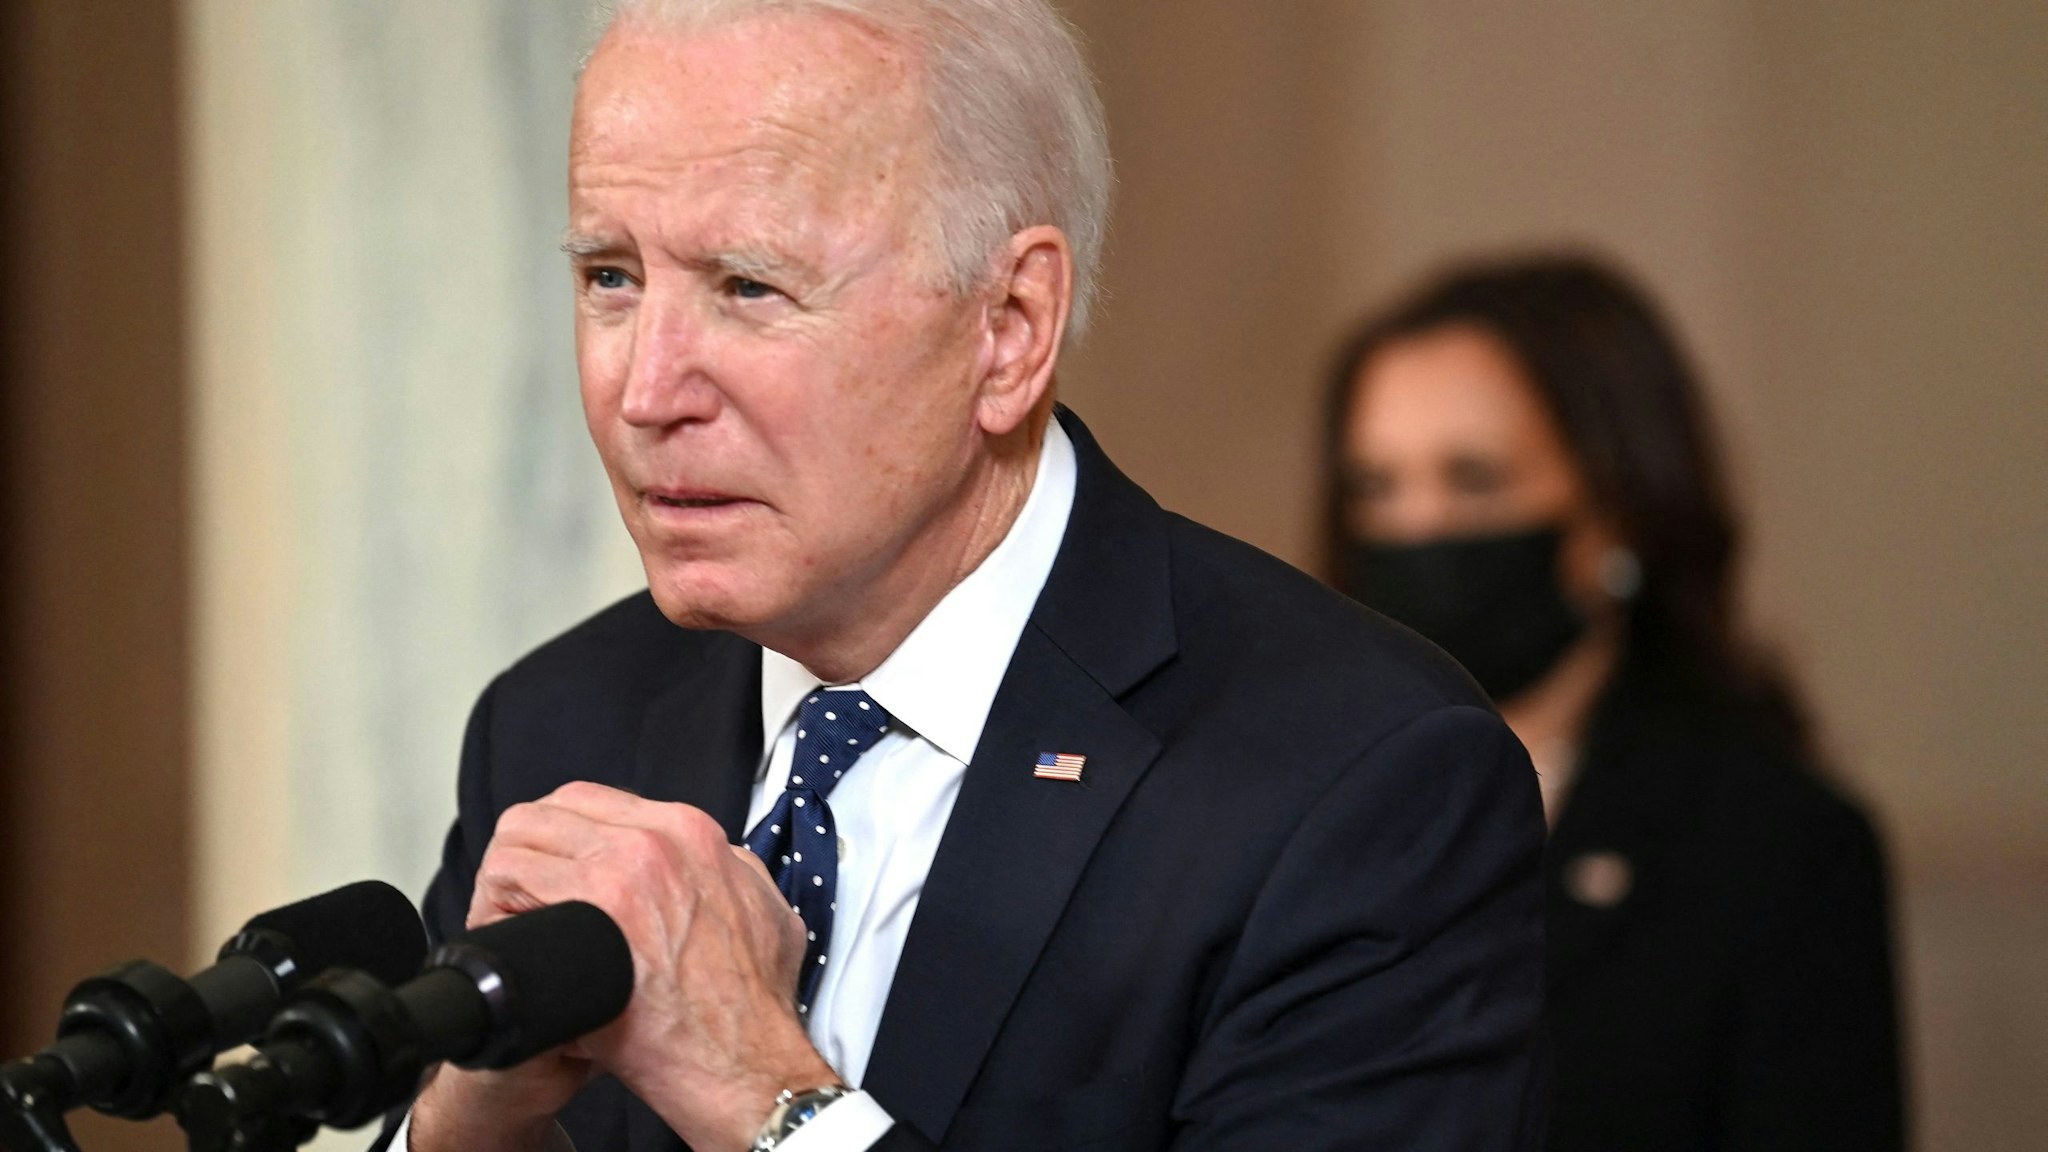 US President Joe Biden gestures as he delivers remarks on the guilty verdict against former policeman Derek Chauvin at the White House in Washington, DC, on April 20, 2021. - Derek Chauvin, a white former Minneapolis police officer, was convicted on April 20 of murdering African-American George Floyd after a racially charged trial that was seen as a pivotal test of police accountability in the United States.